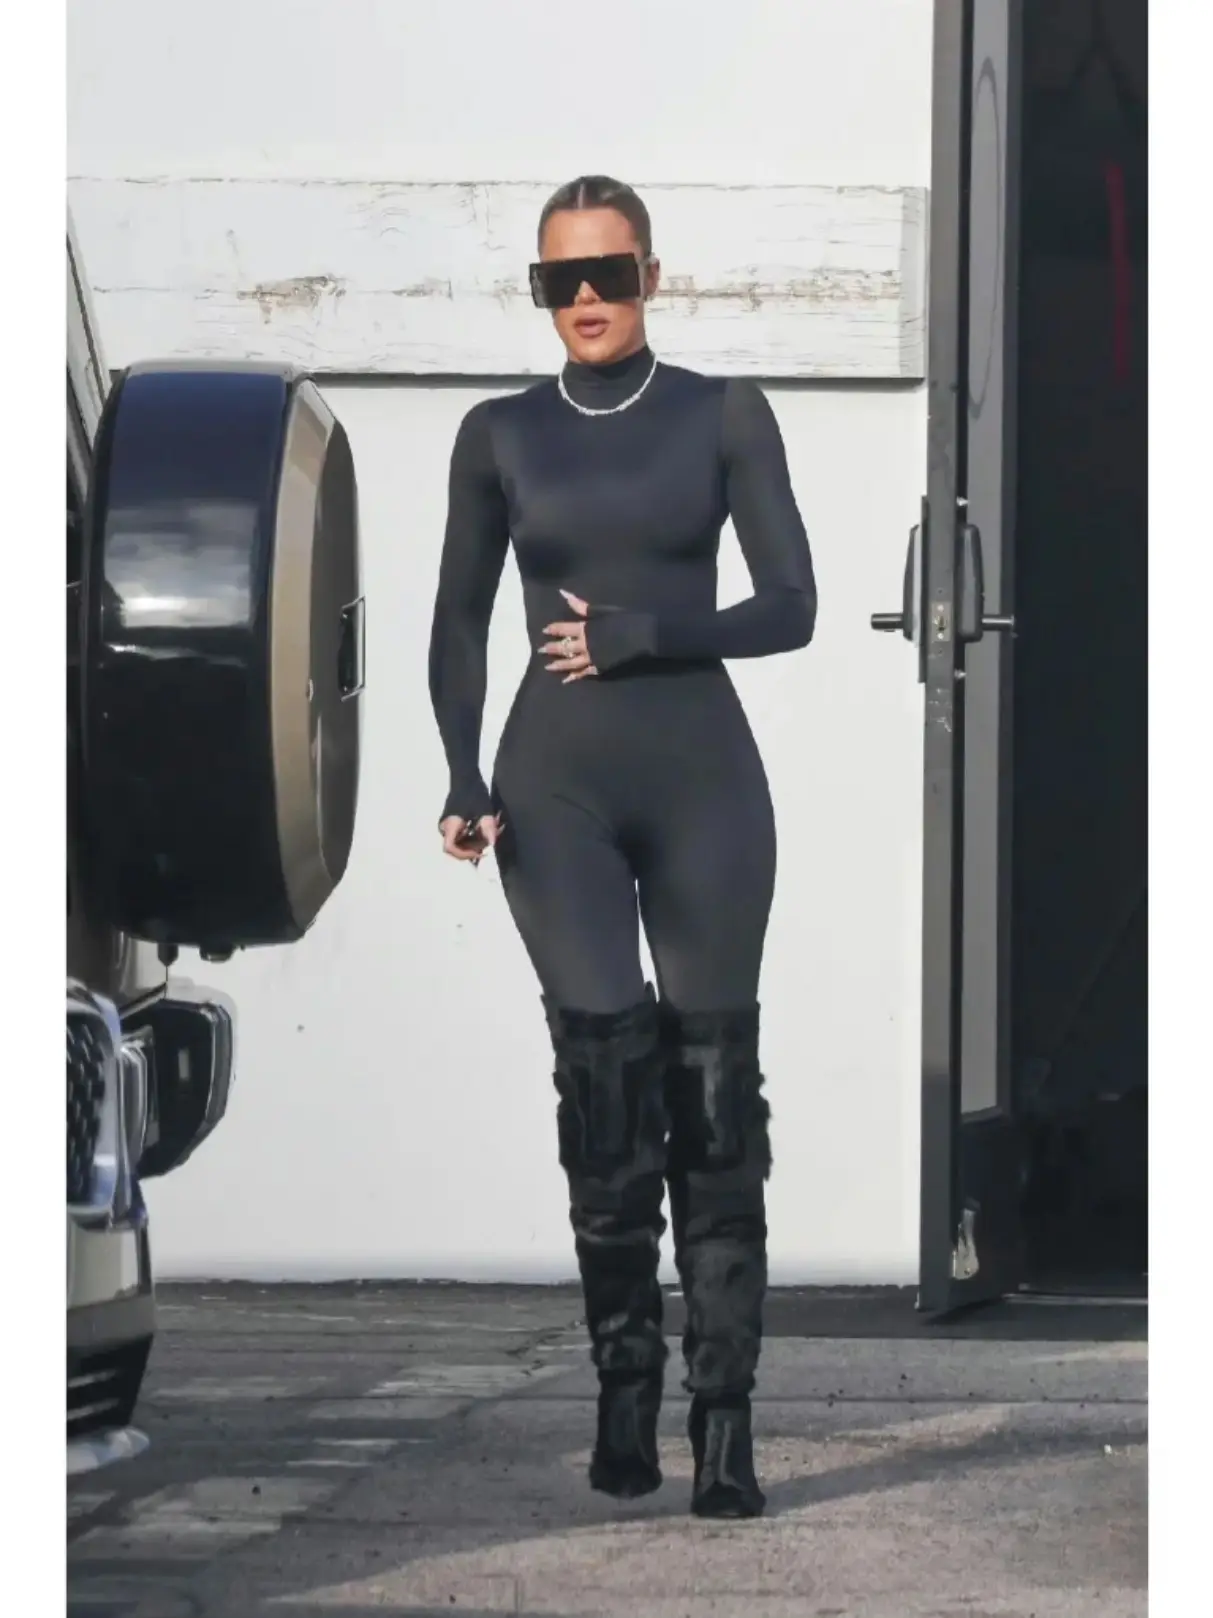 Kim and Khloé Kardashian Match in Black Bodysuit and Catsuit